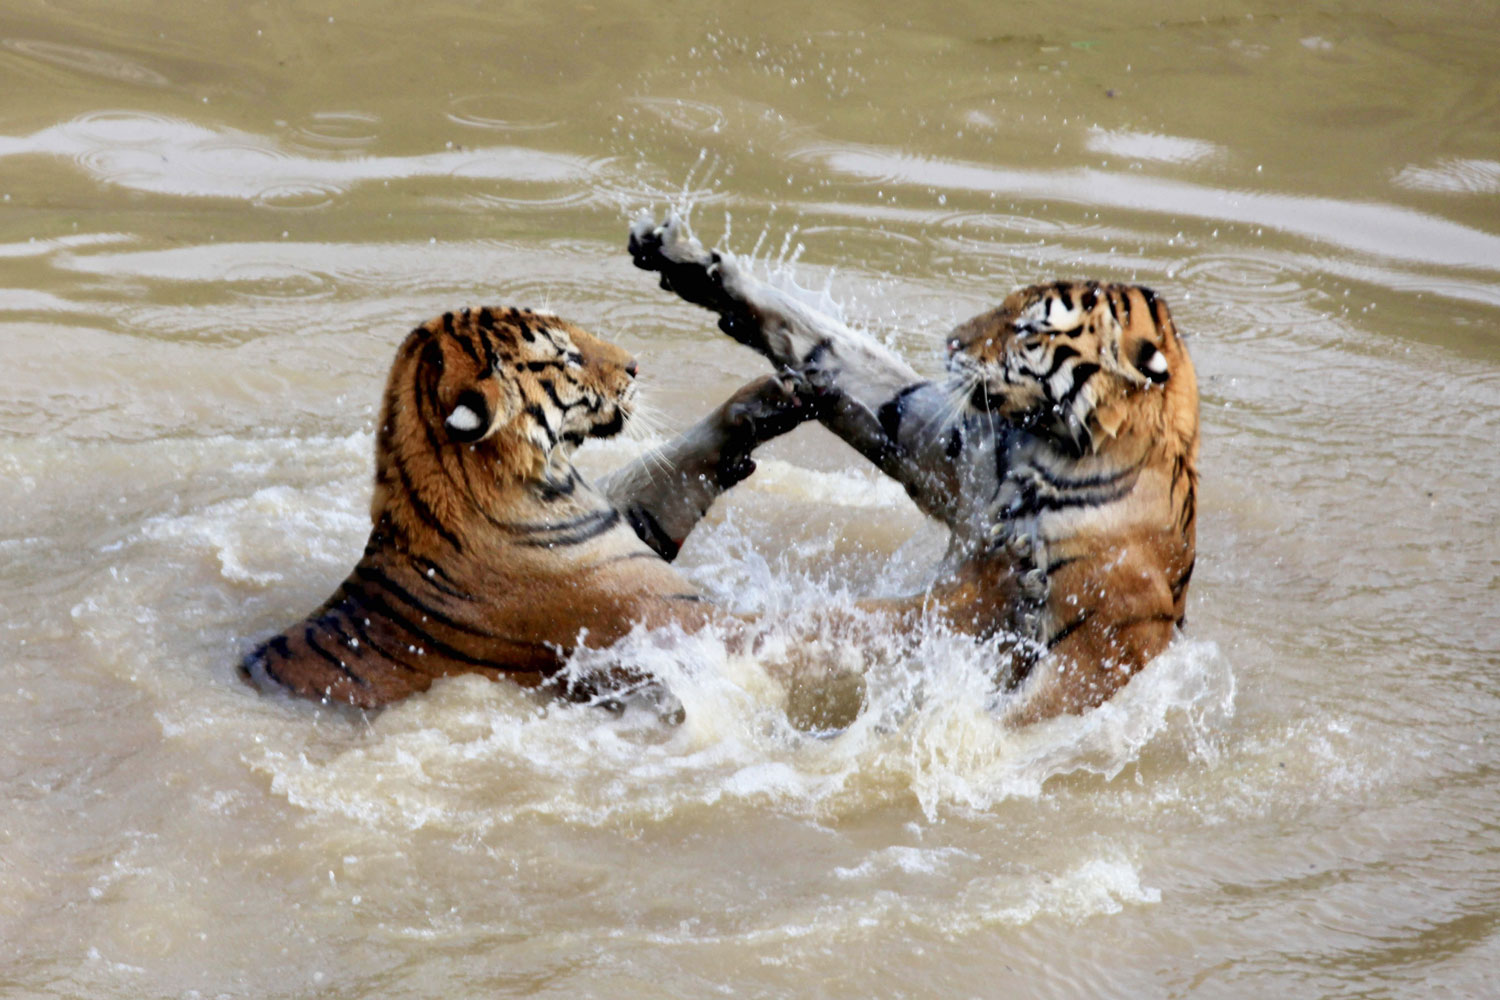 Tigers play in the water in the Huangshan Mountain of east China's Anhui Province, July 22, 2011. As the temperatures in Hunagshan rise, tigers in Huangshan choose to play in the water to relieve the summer heat.